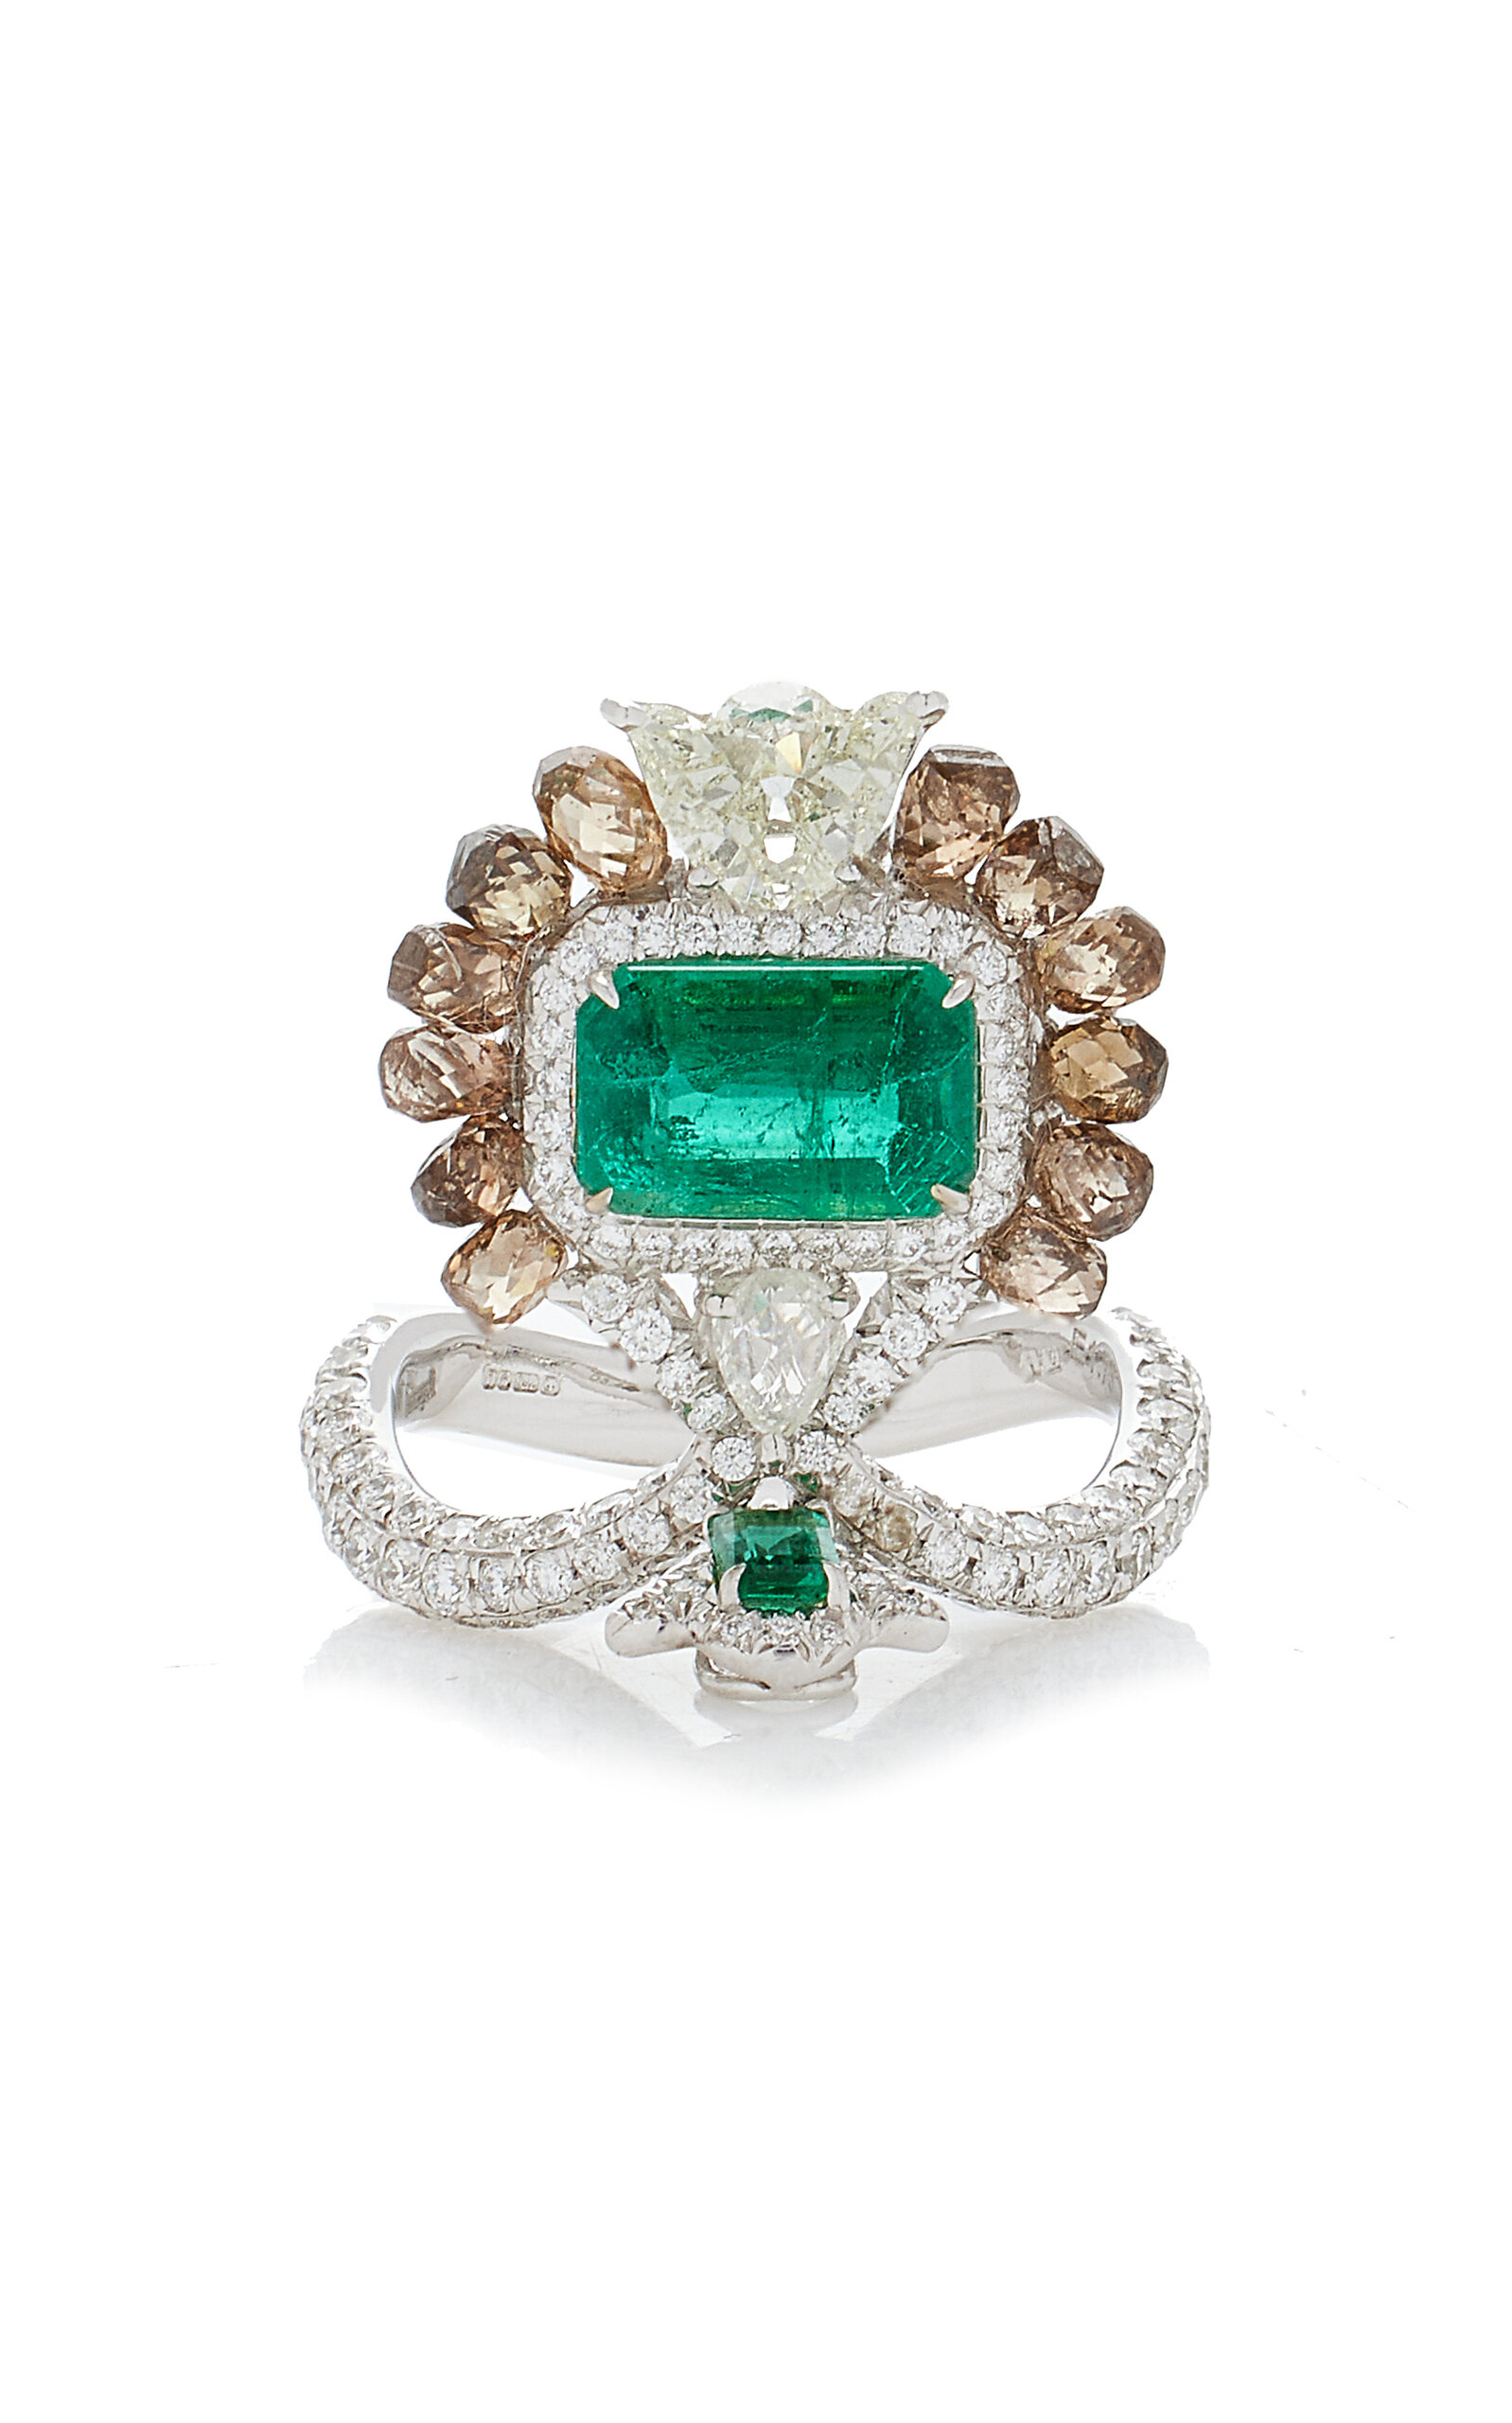 Amrapali One Of A Kind 18k White Gold Diamond & Emerald Ring In Green